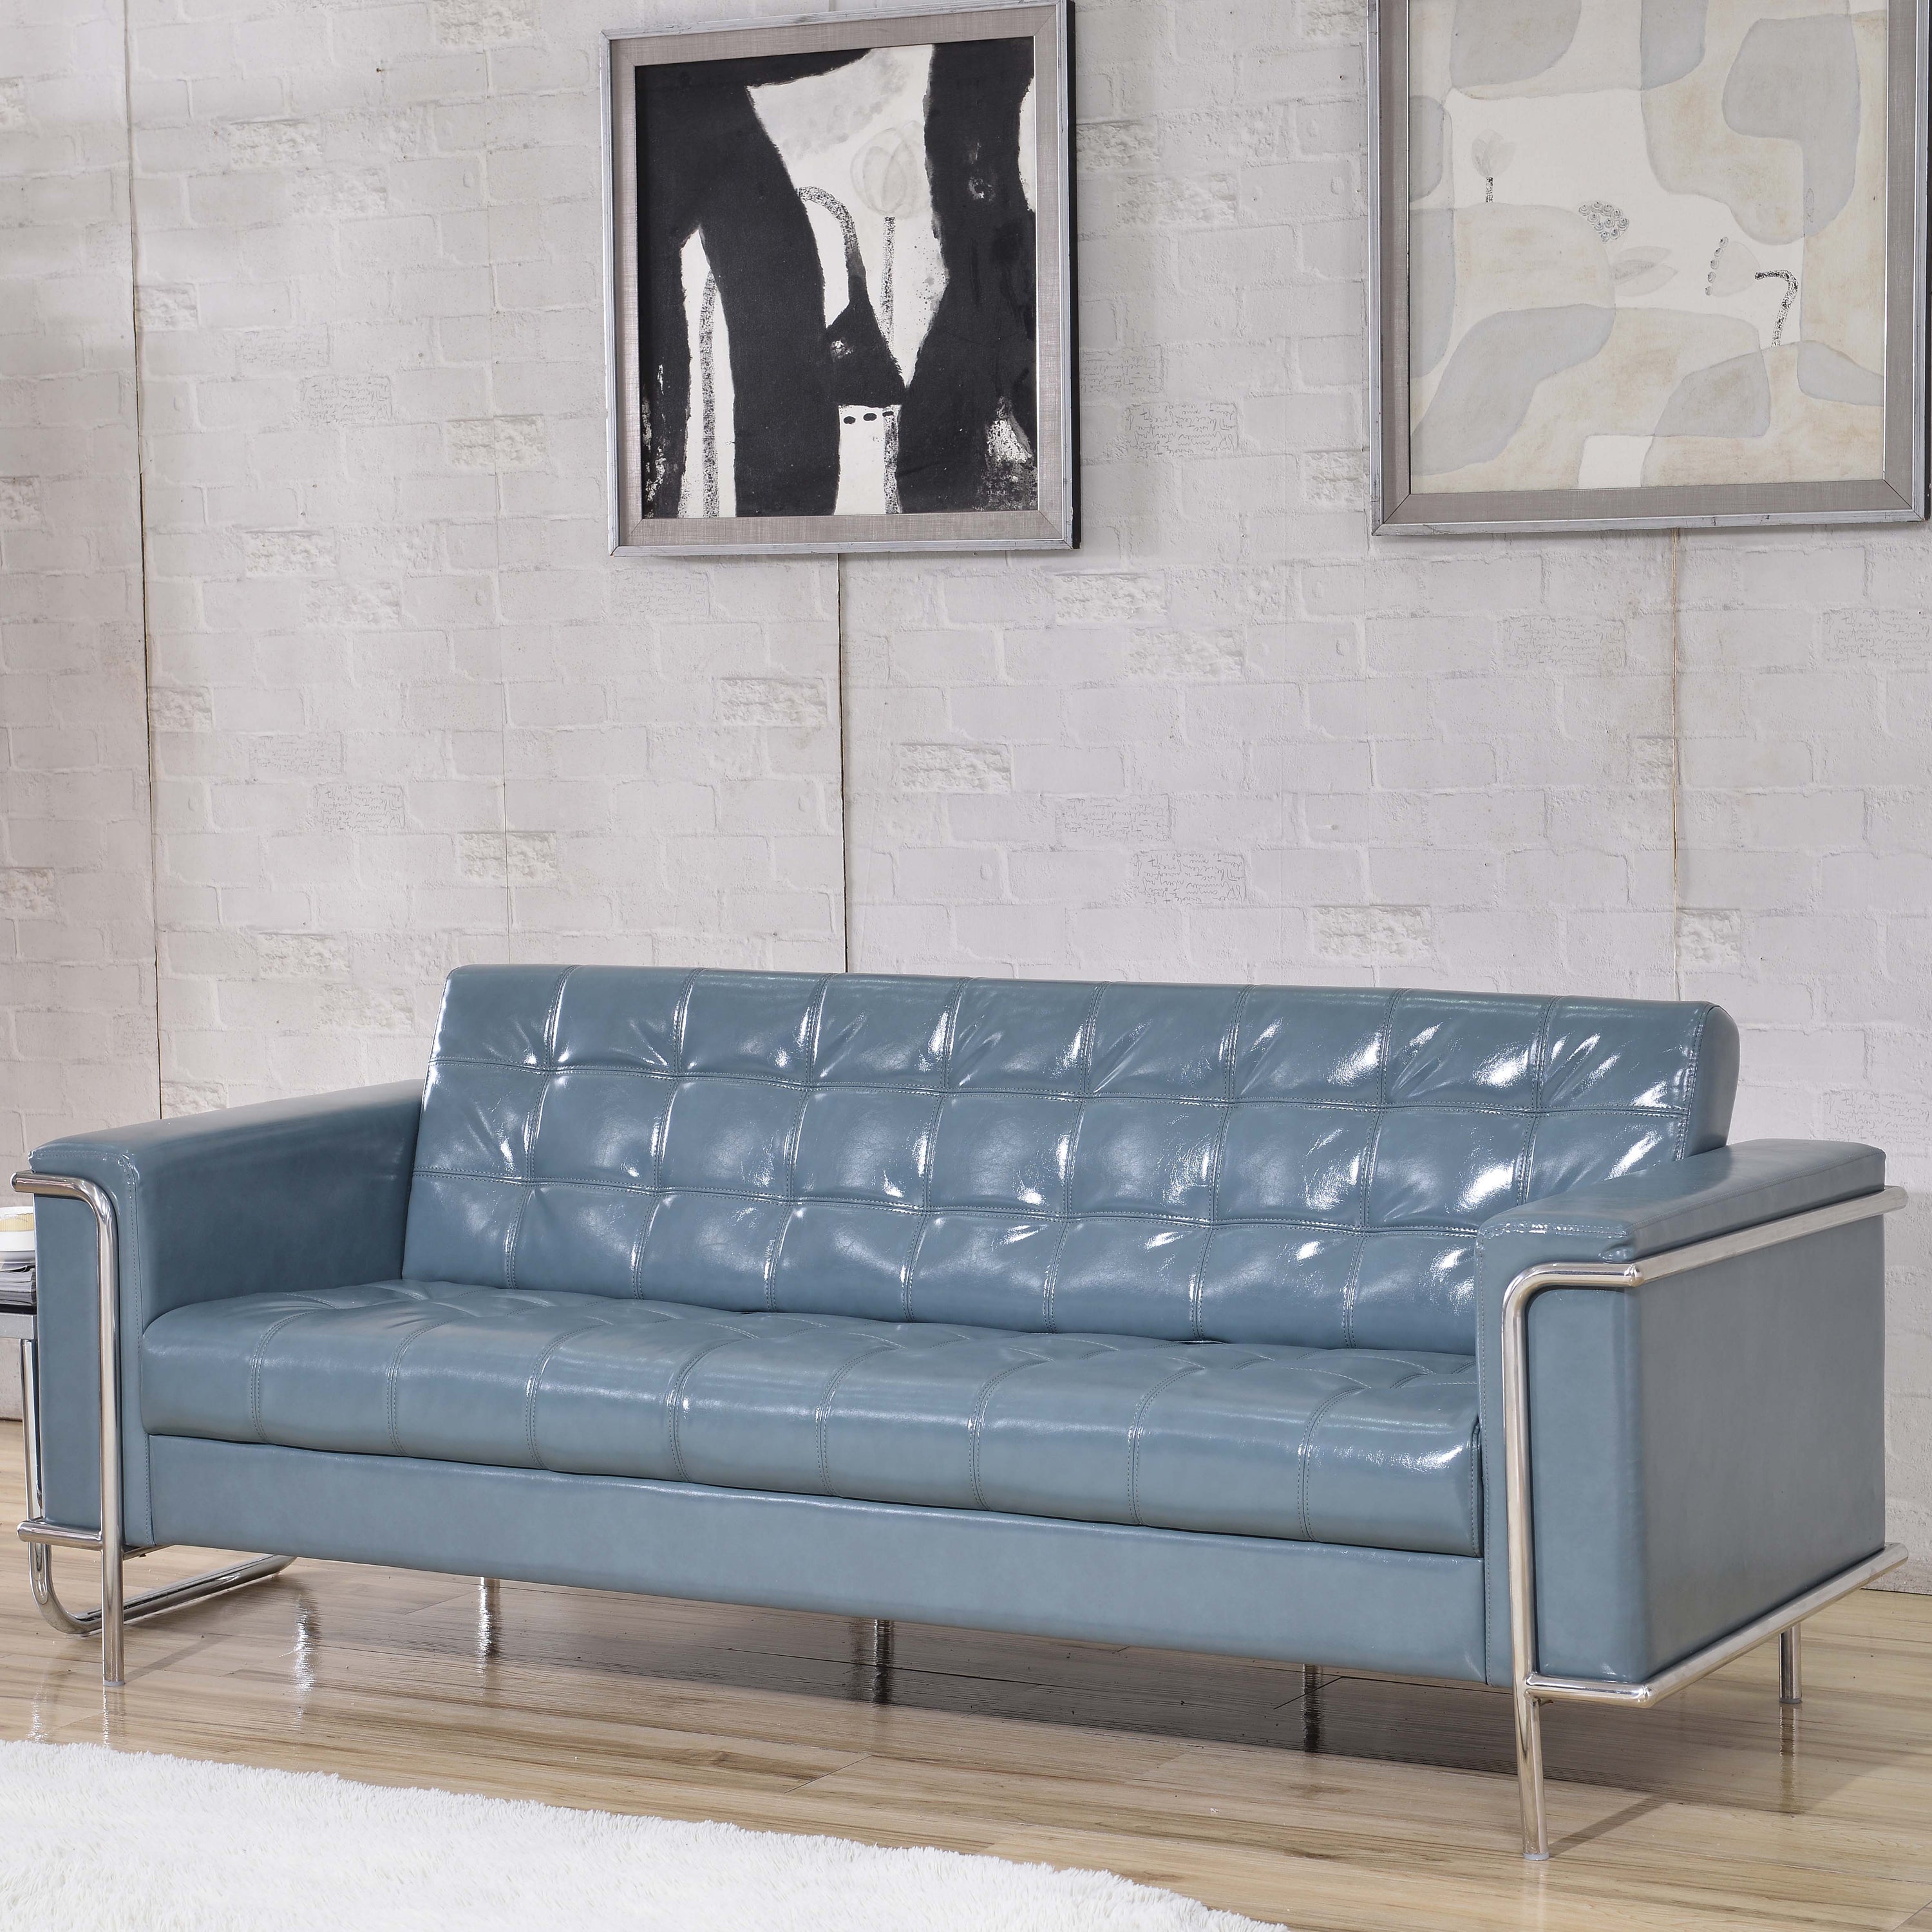 HERCULES Lesley Series Contemporary LeatherSoft Double Stitch Detail Sofa with Encasing Frame-Reception Sofa-Flash Furniture-Wall2Wall Furnishings